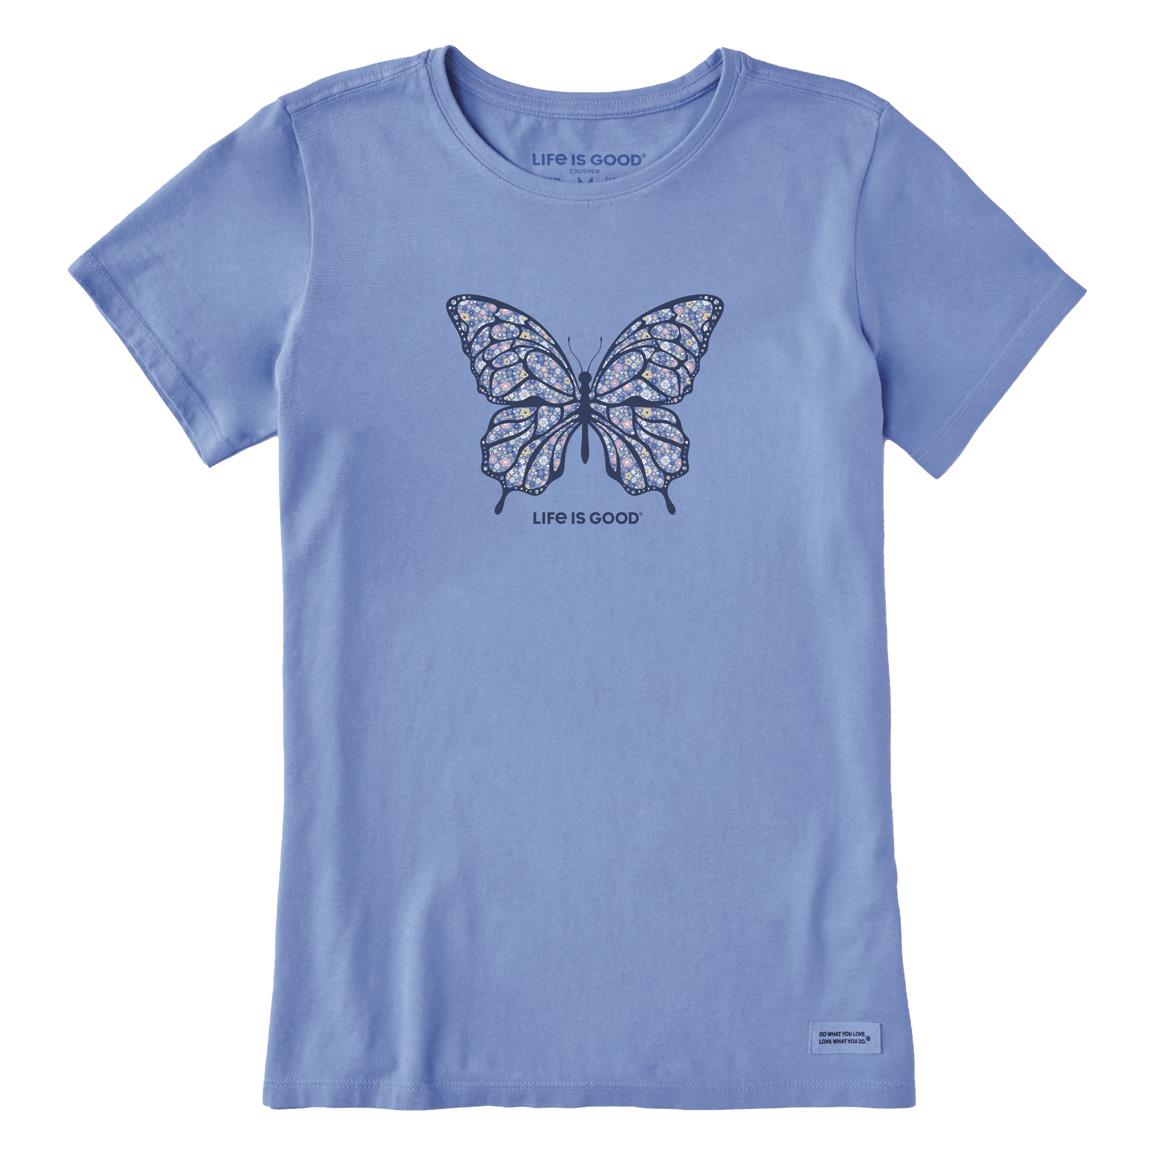 Life is Good Women's Ditsy Floral Butterfly Crusher Tee, Cornflower Blue